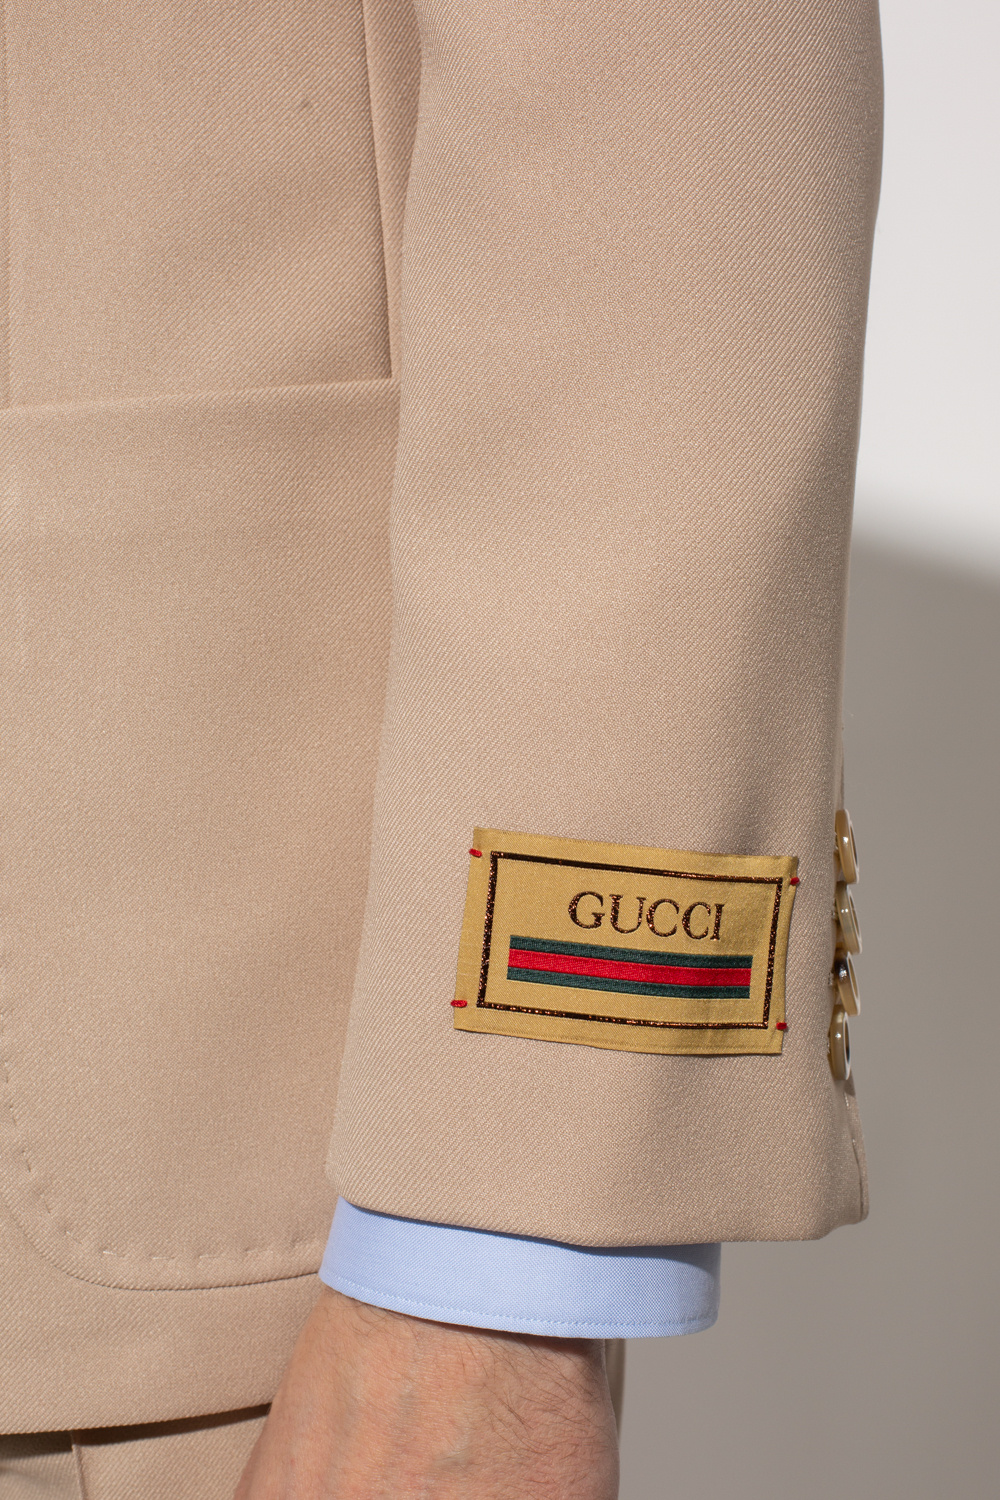 gucci boots Double-breasted blazer